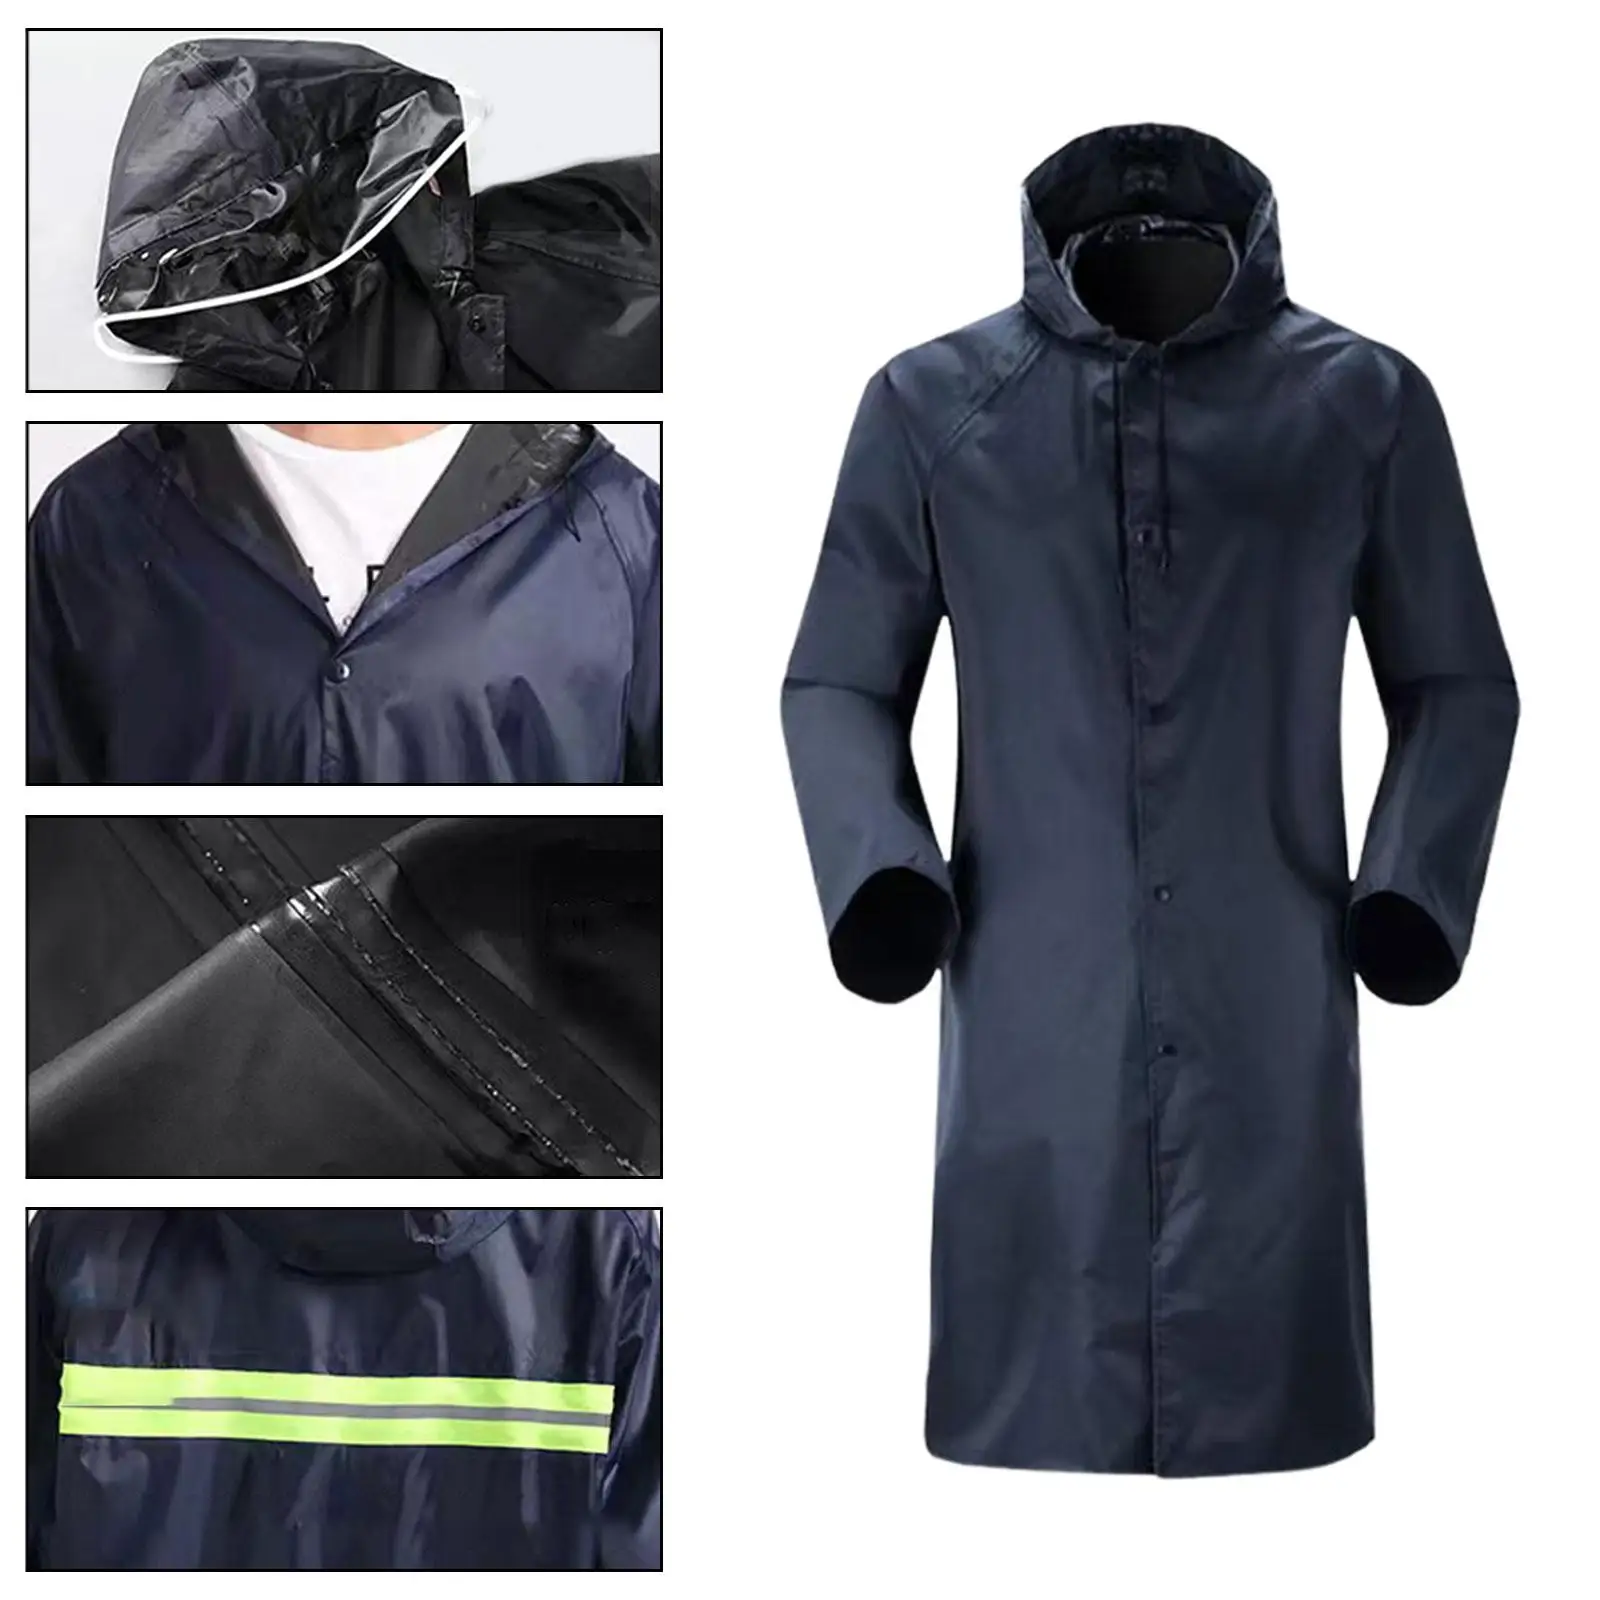 Rain Jacket Reusable with Fluorescent Strips Lightweight Workwear Rain Suit for Riding Protective Unisex Travel Outdoor Cycling